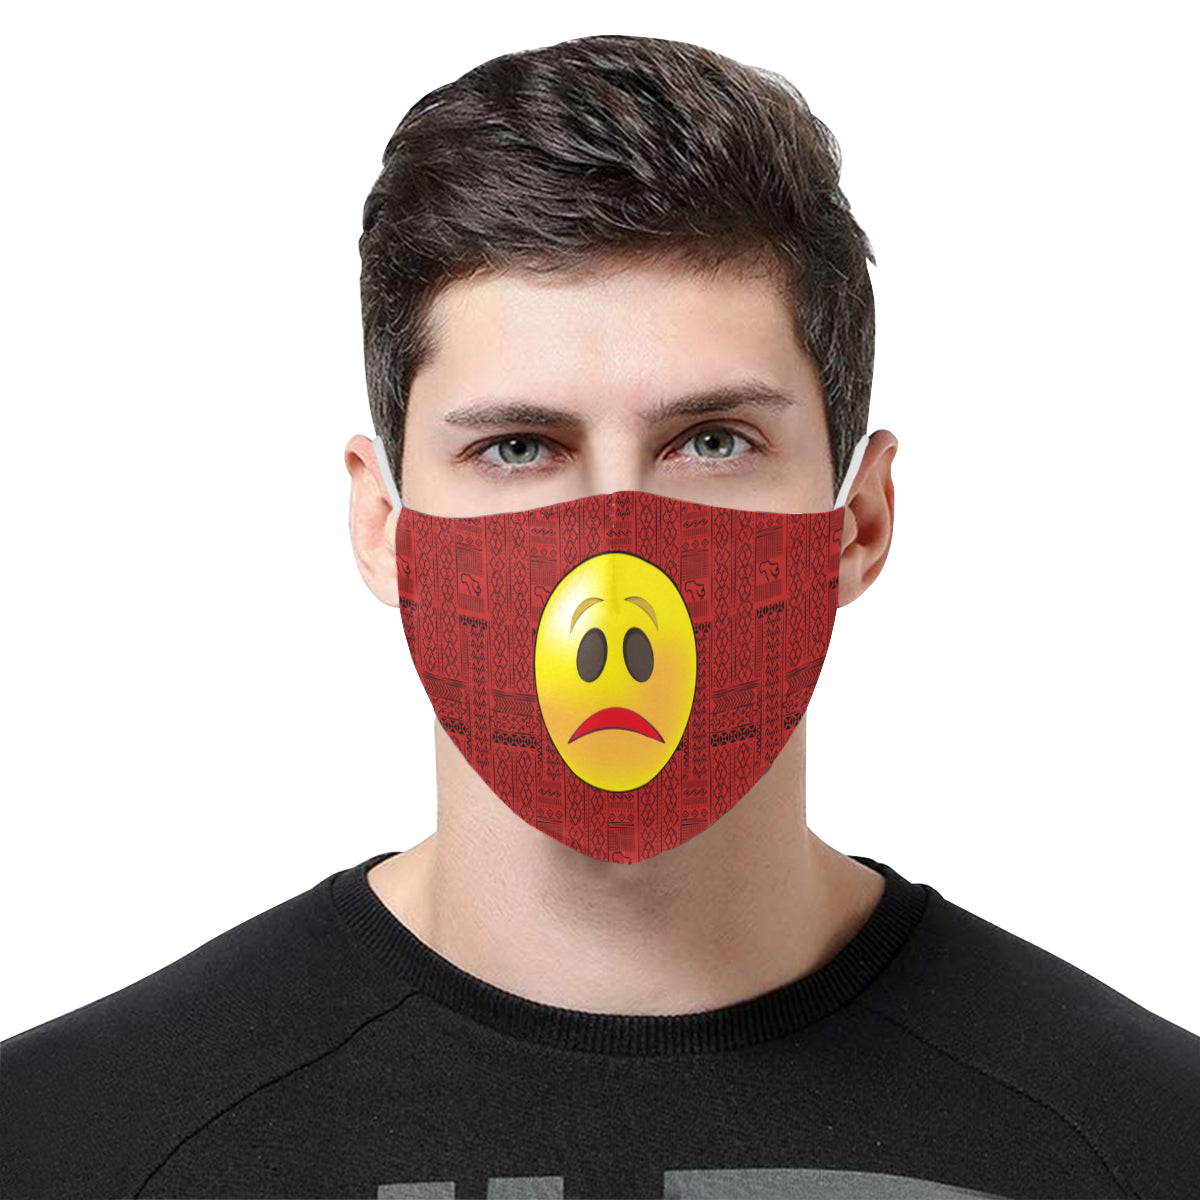 Sad face Tribal Print Emoji Cotton Fabric Face Mask with Filter Slot and Adjustable Strap - Non-medical use (2 Filters Included)